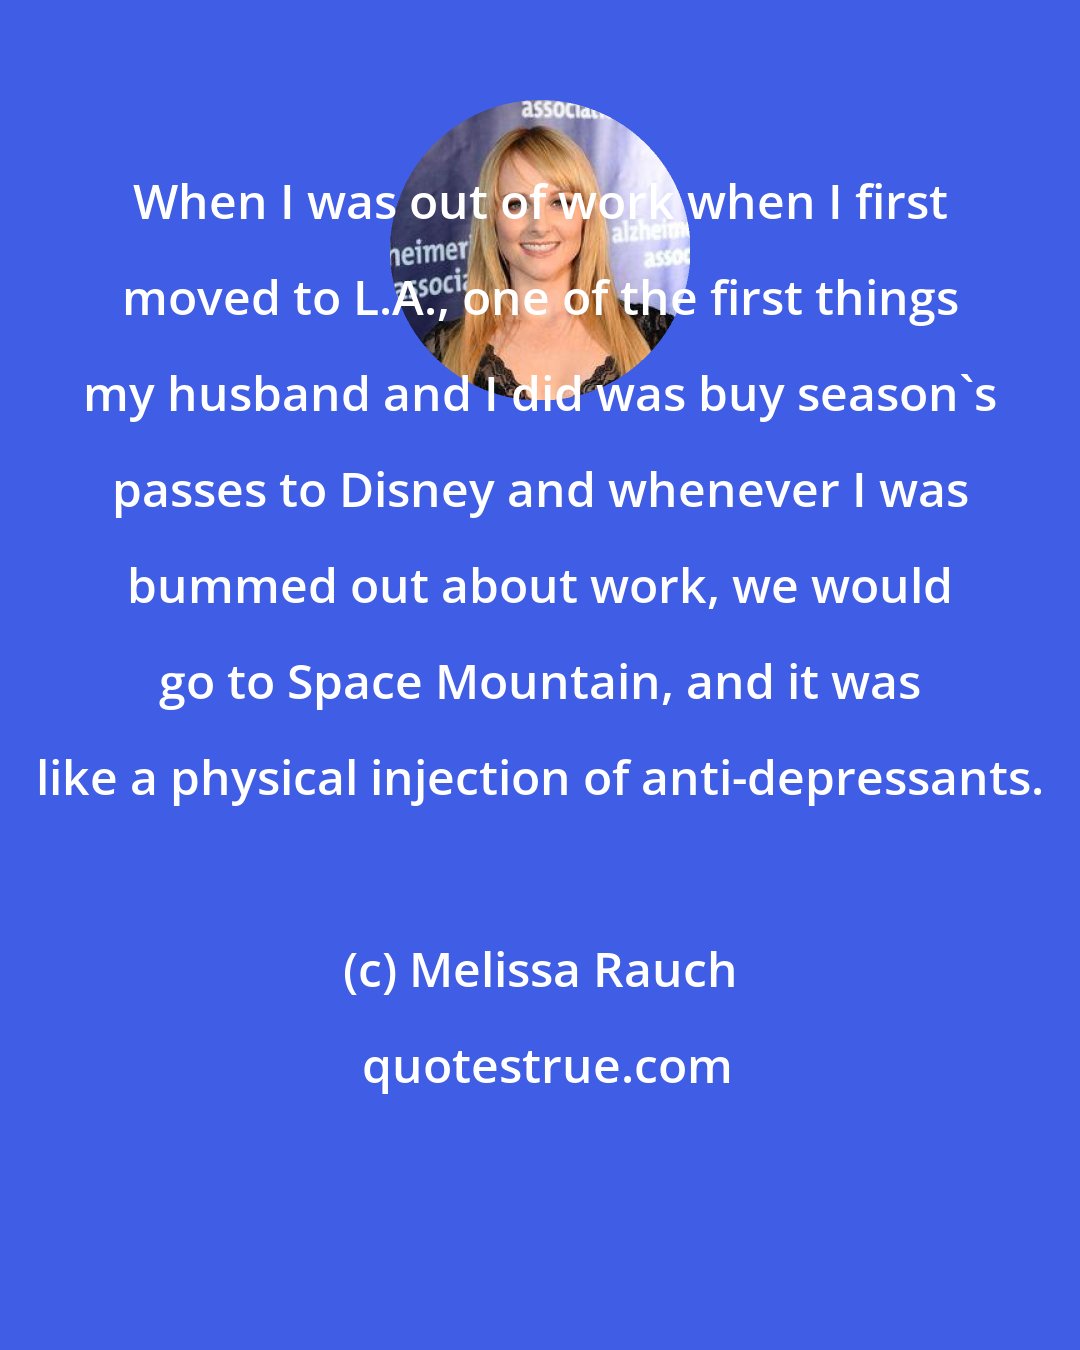 Melissa Rauch: When I was out of work when I first moved to L.A., one of the first things my husband and I did was buy season's passes to Disney and whenever I was bummed out about work, we would go to Space Mountain, and it was like a physical injection of anti-depressants.